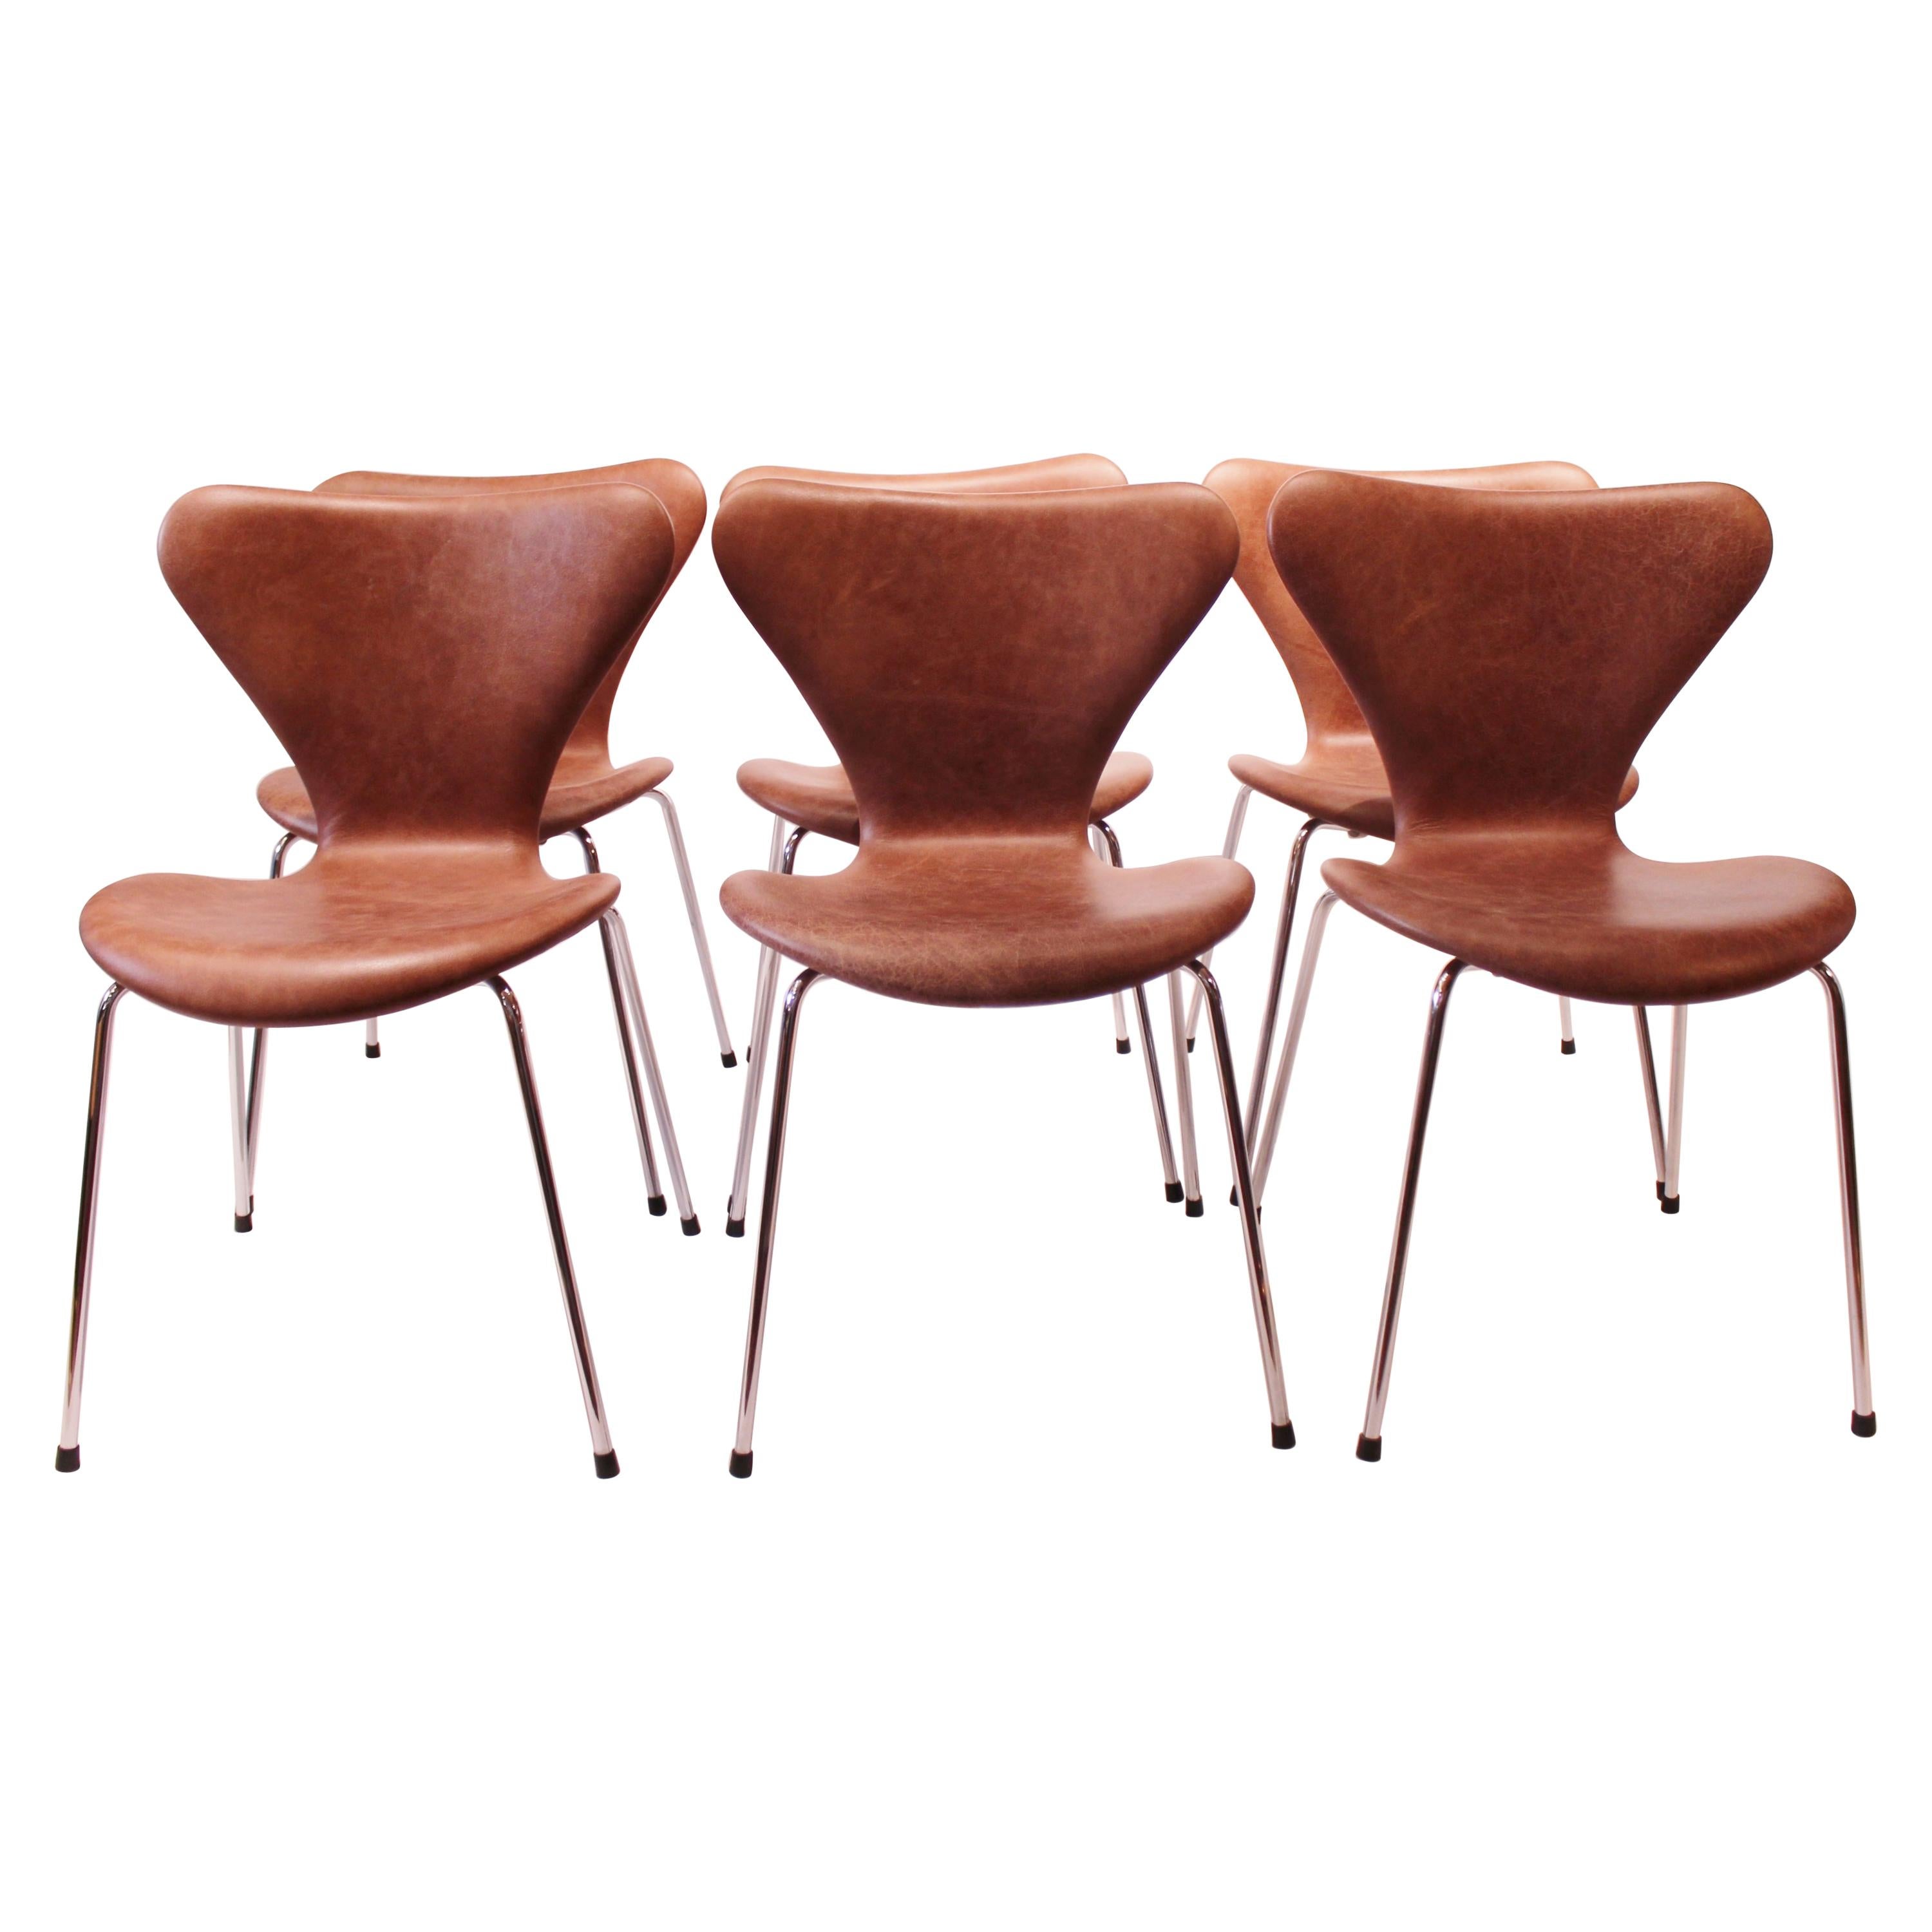 Set of six Series Seven Chairs, Model 3107, Designed by Arne Jacobsen, 1980s